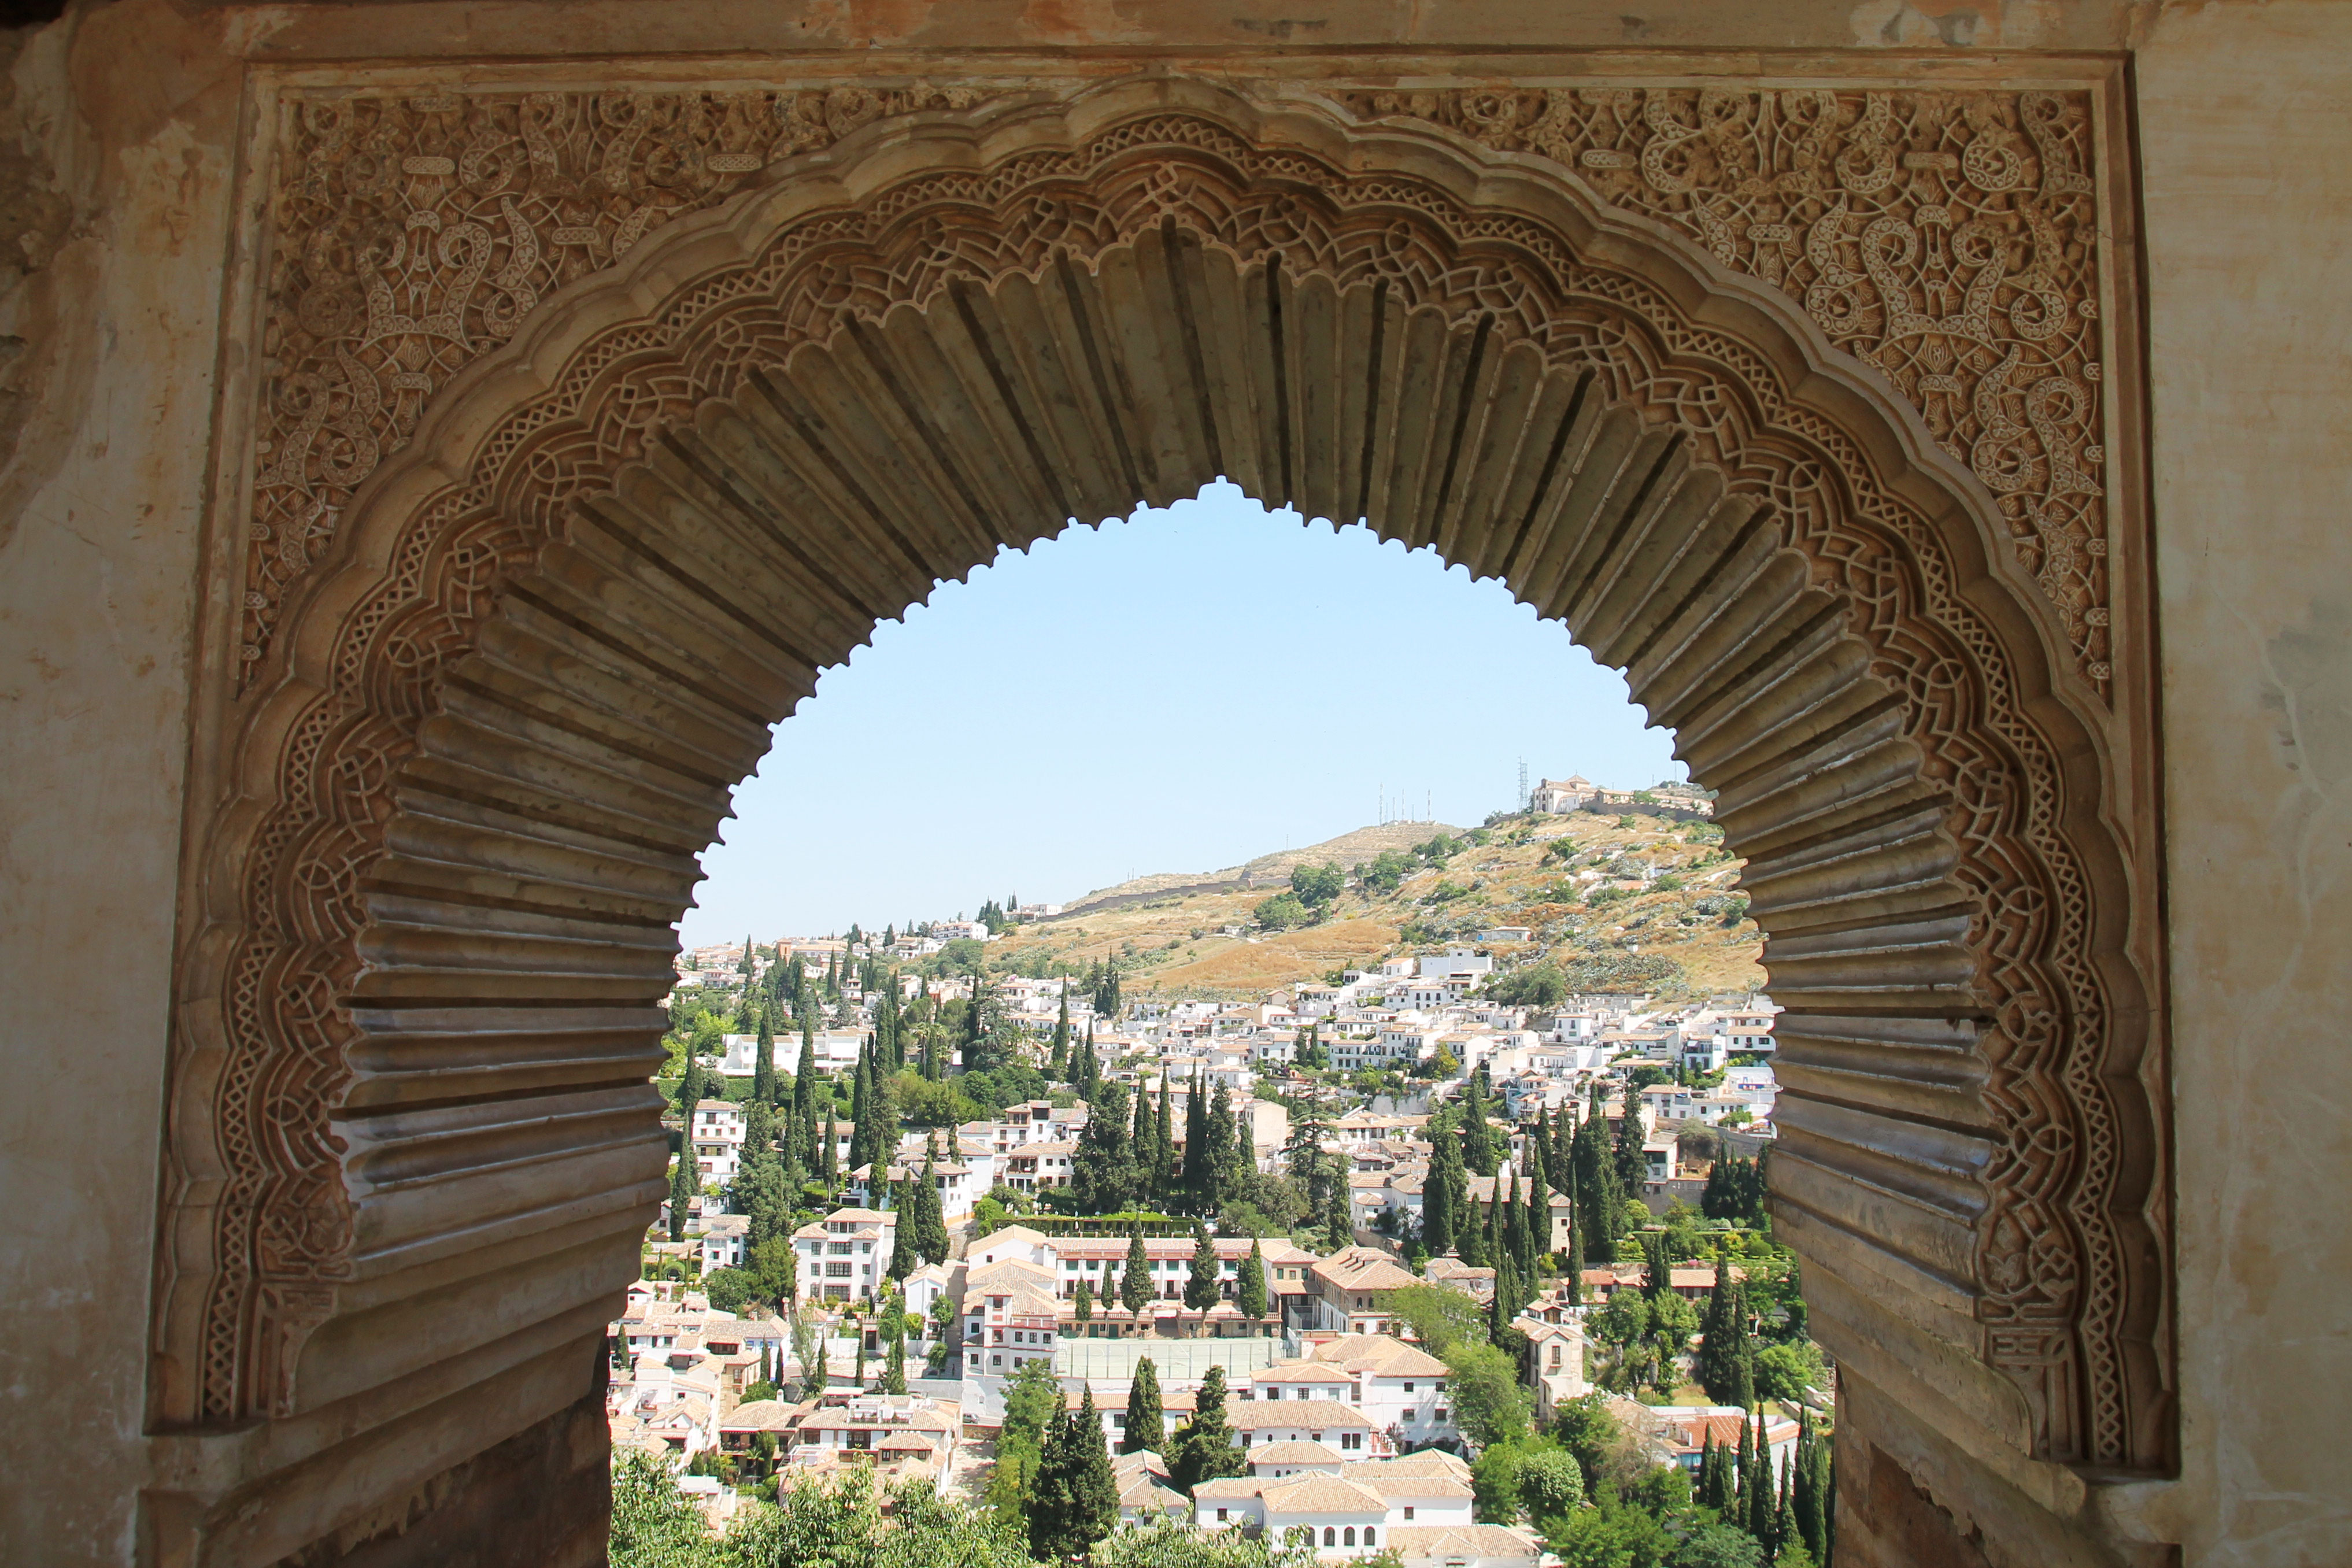 Granada Alhambra and other pearls